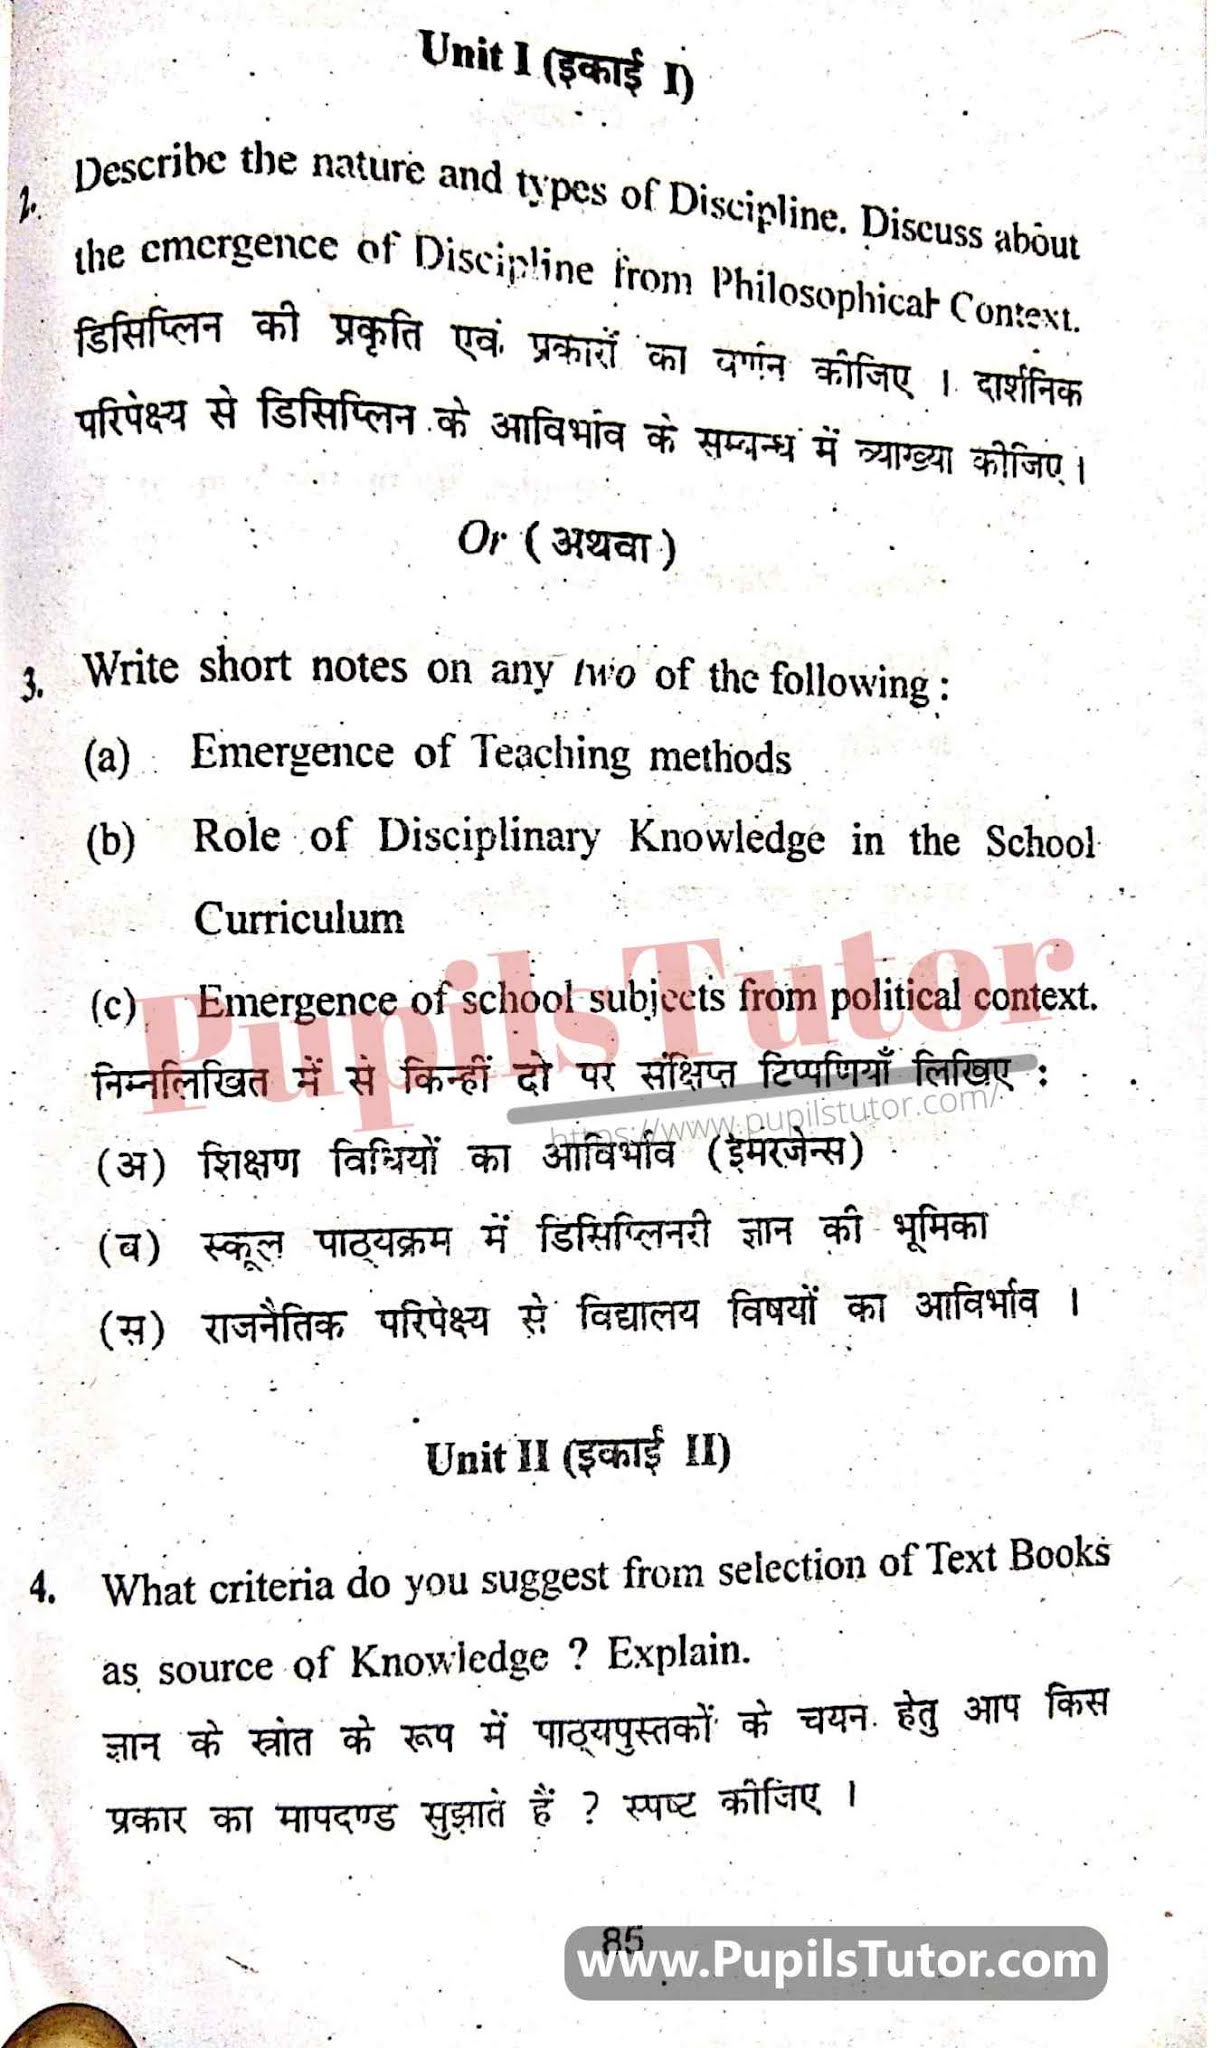 KUK (Kurukshetra University, Haryana) Understanding Discipline And Subjects Question Paper 2019 For B.Ed 1st And 2nd Year And All The 4 Semesters In English And Hindi Medium Free Download PDF - Page 2 - www.pupilstutor.com